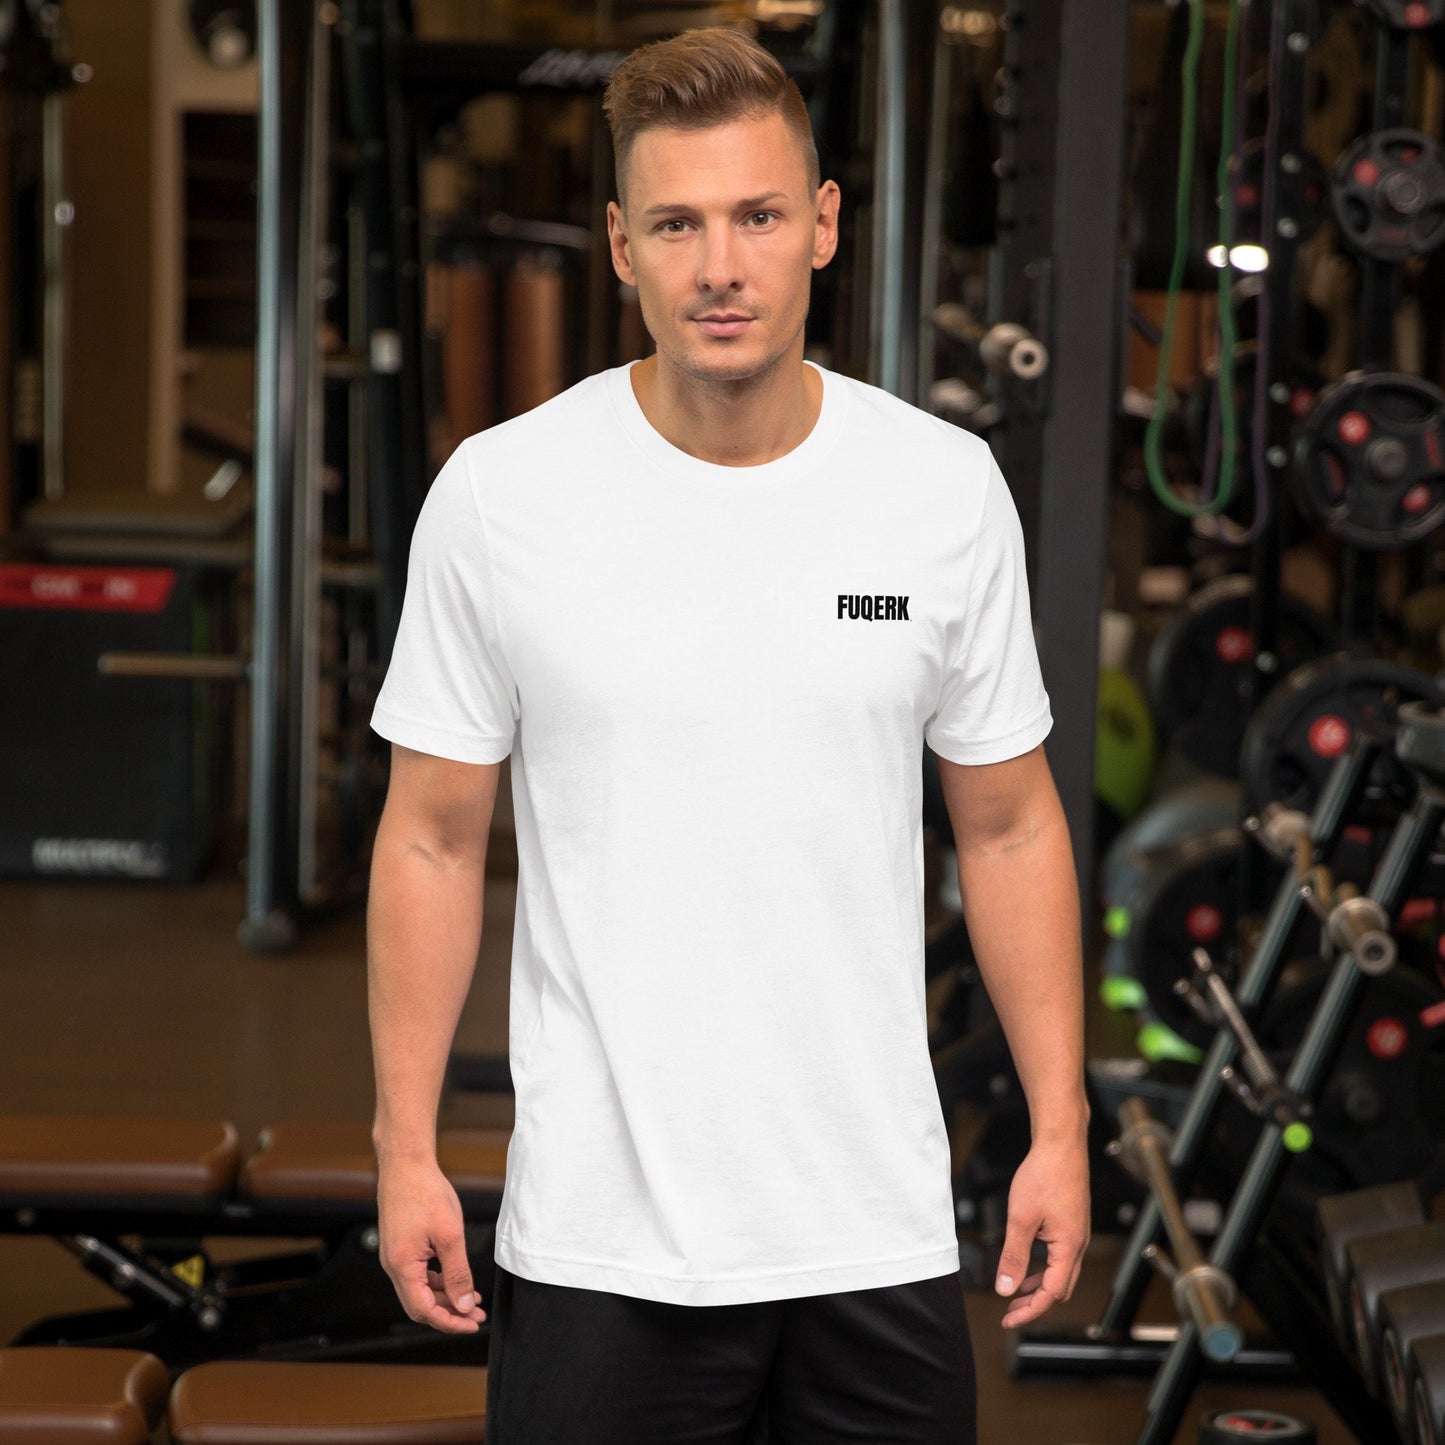 FUQERK Fitness: 'I'm Off to the Gym!' Unisex White Tee